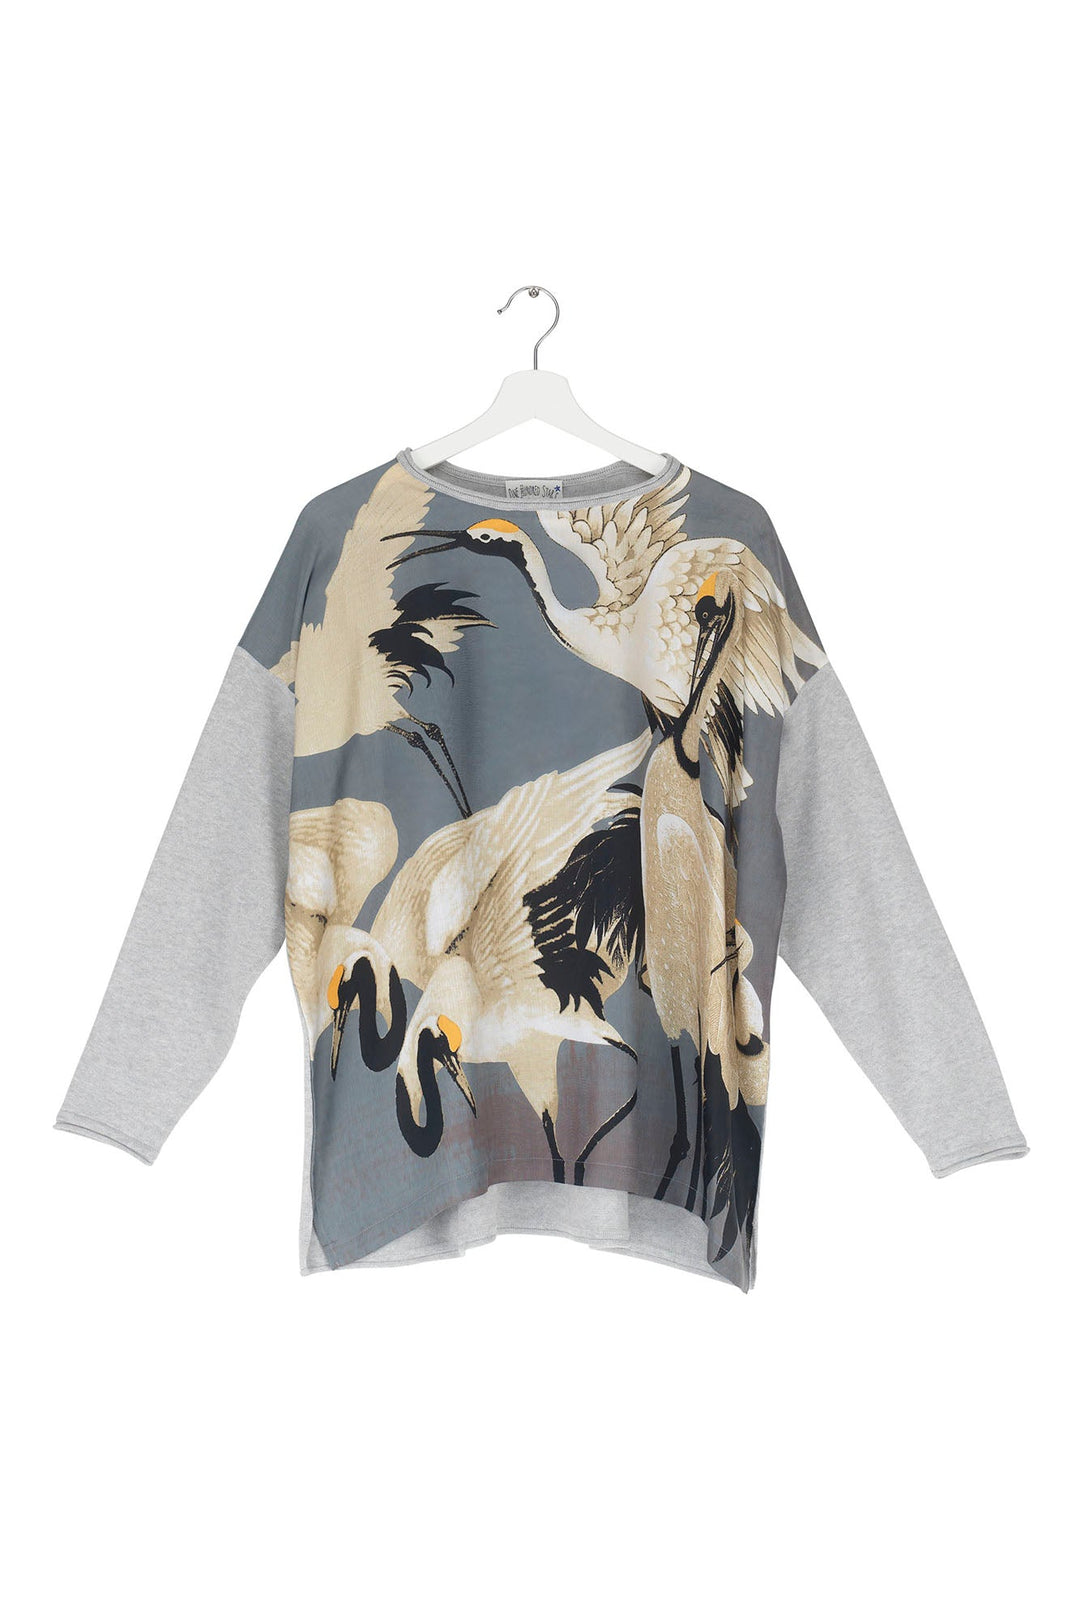 One Hundred Stars Stork Crane Slate Grey - Storks and cranes have been a major art deco trend in both fashion and interiors and this Stork Grey Cotton Jumper is perfect for anyone looking for something chic, stylish and in vogue!